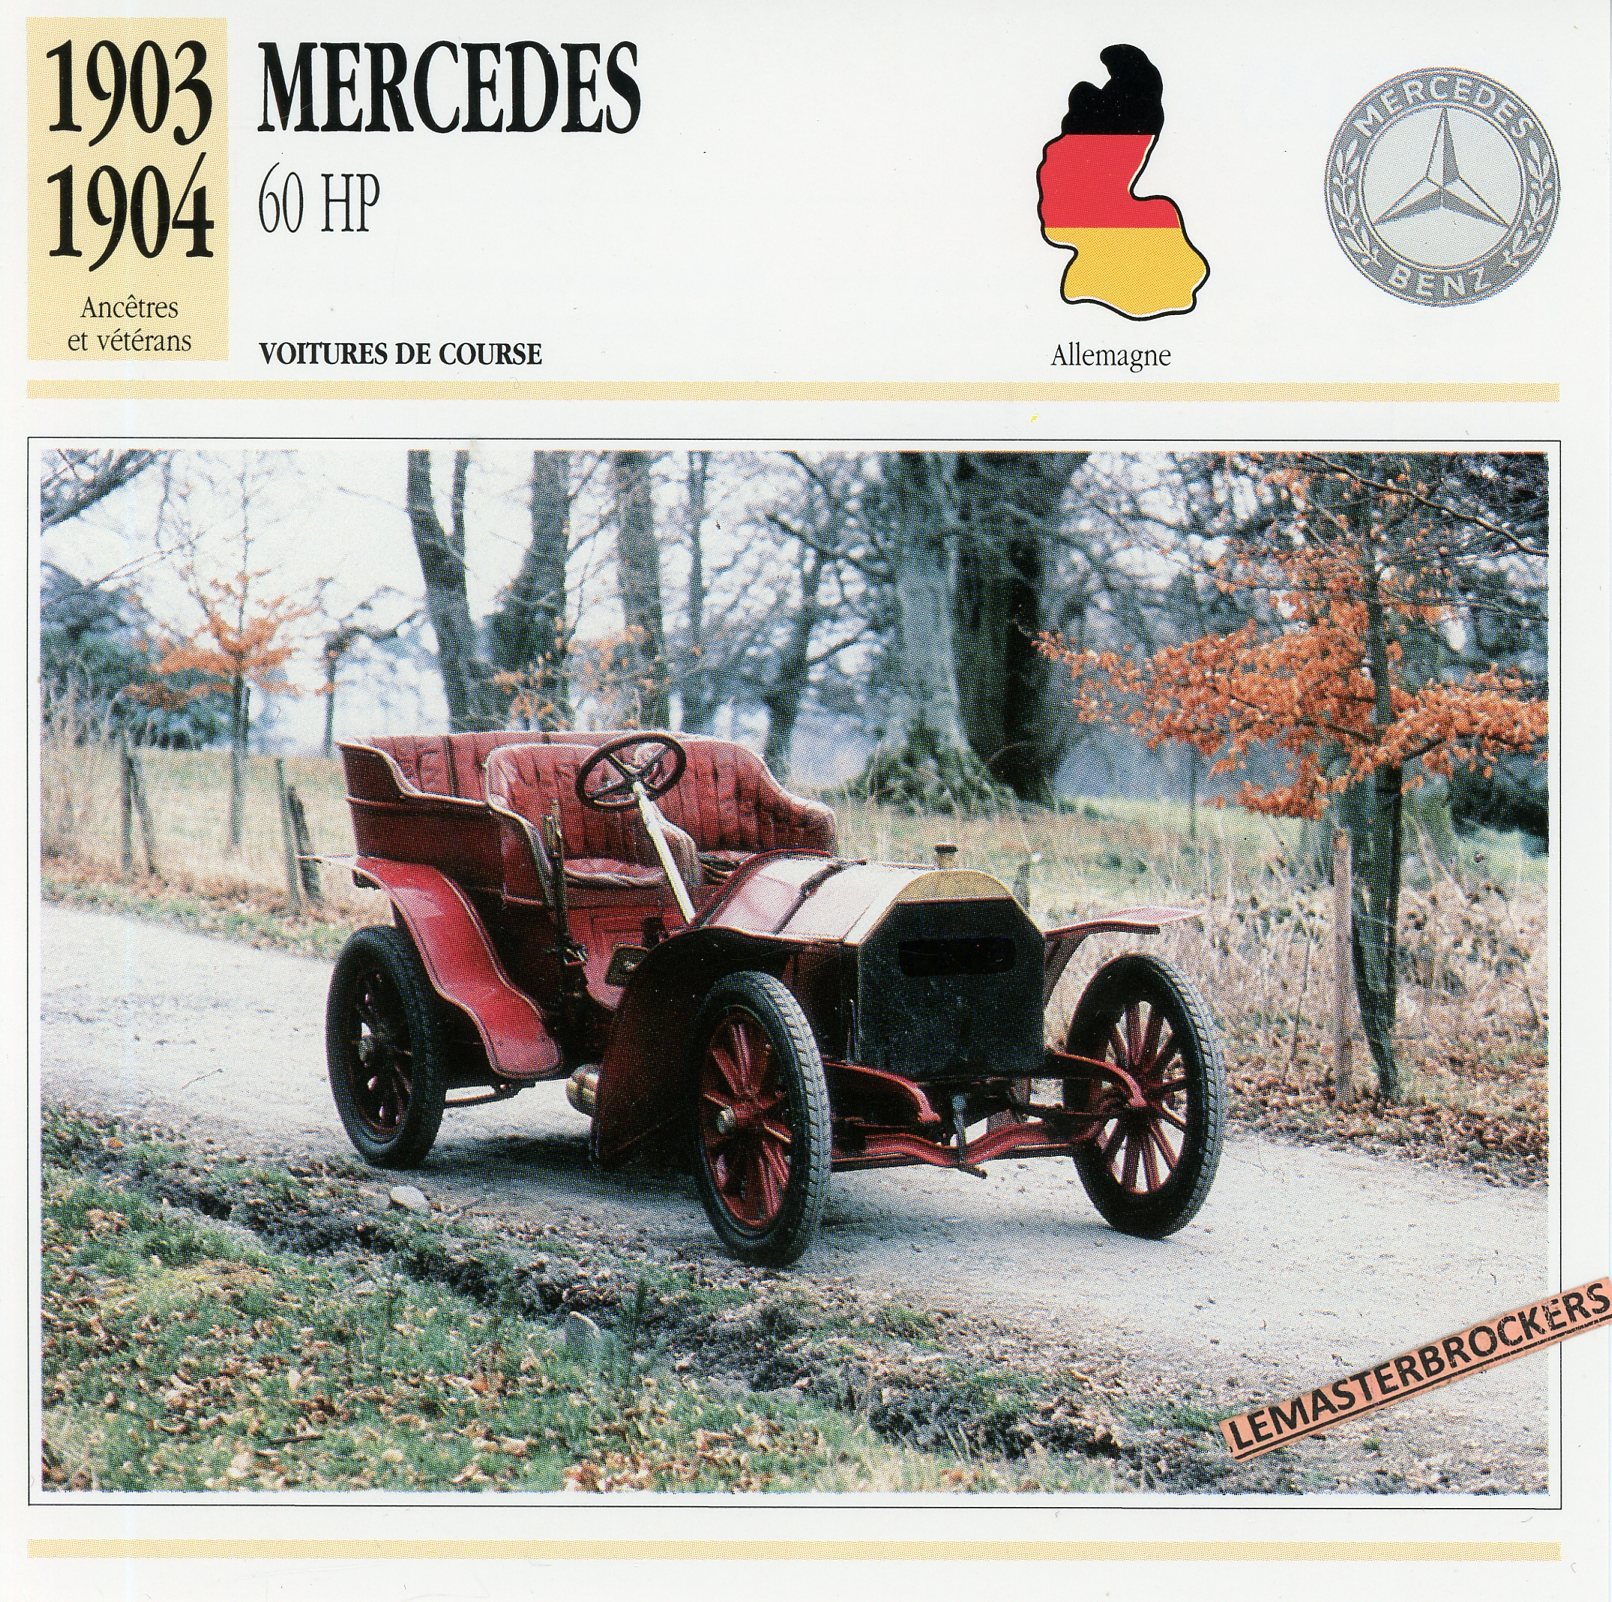 FICHE-AUTO-MERCEDES-60HP-1903-1908-LEMASTERBROCKERS-CARS-CARD